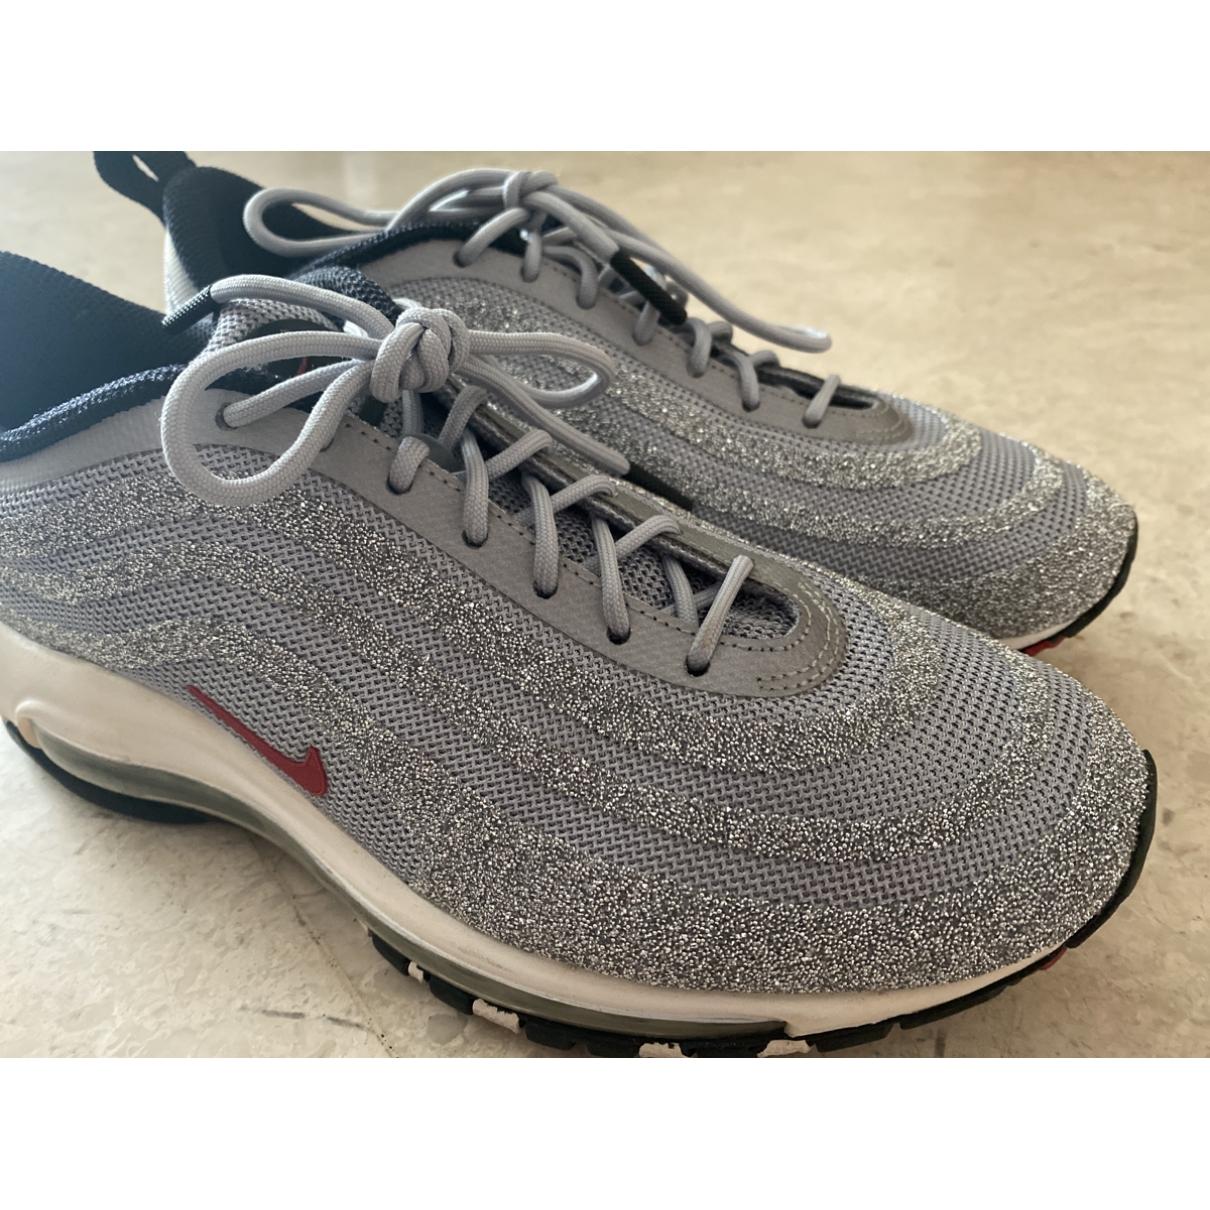 Nike Air Max 97 Glitter Trainers in Grey (Gray) - Lyst